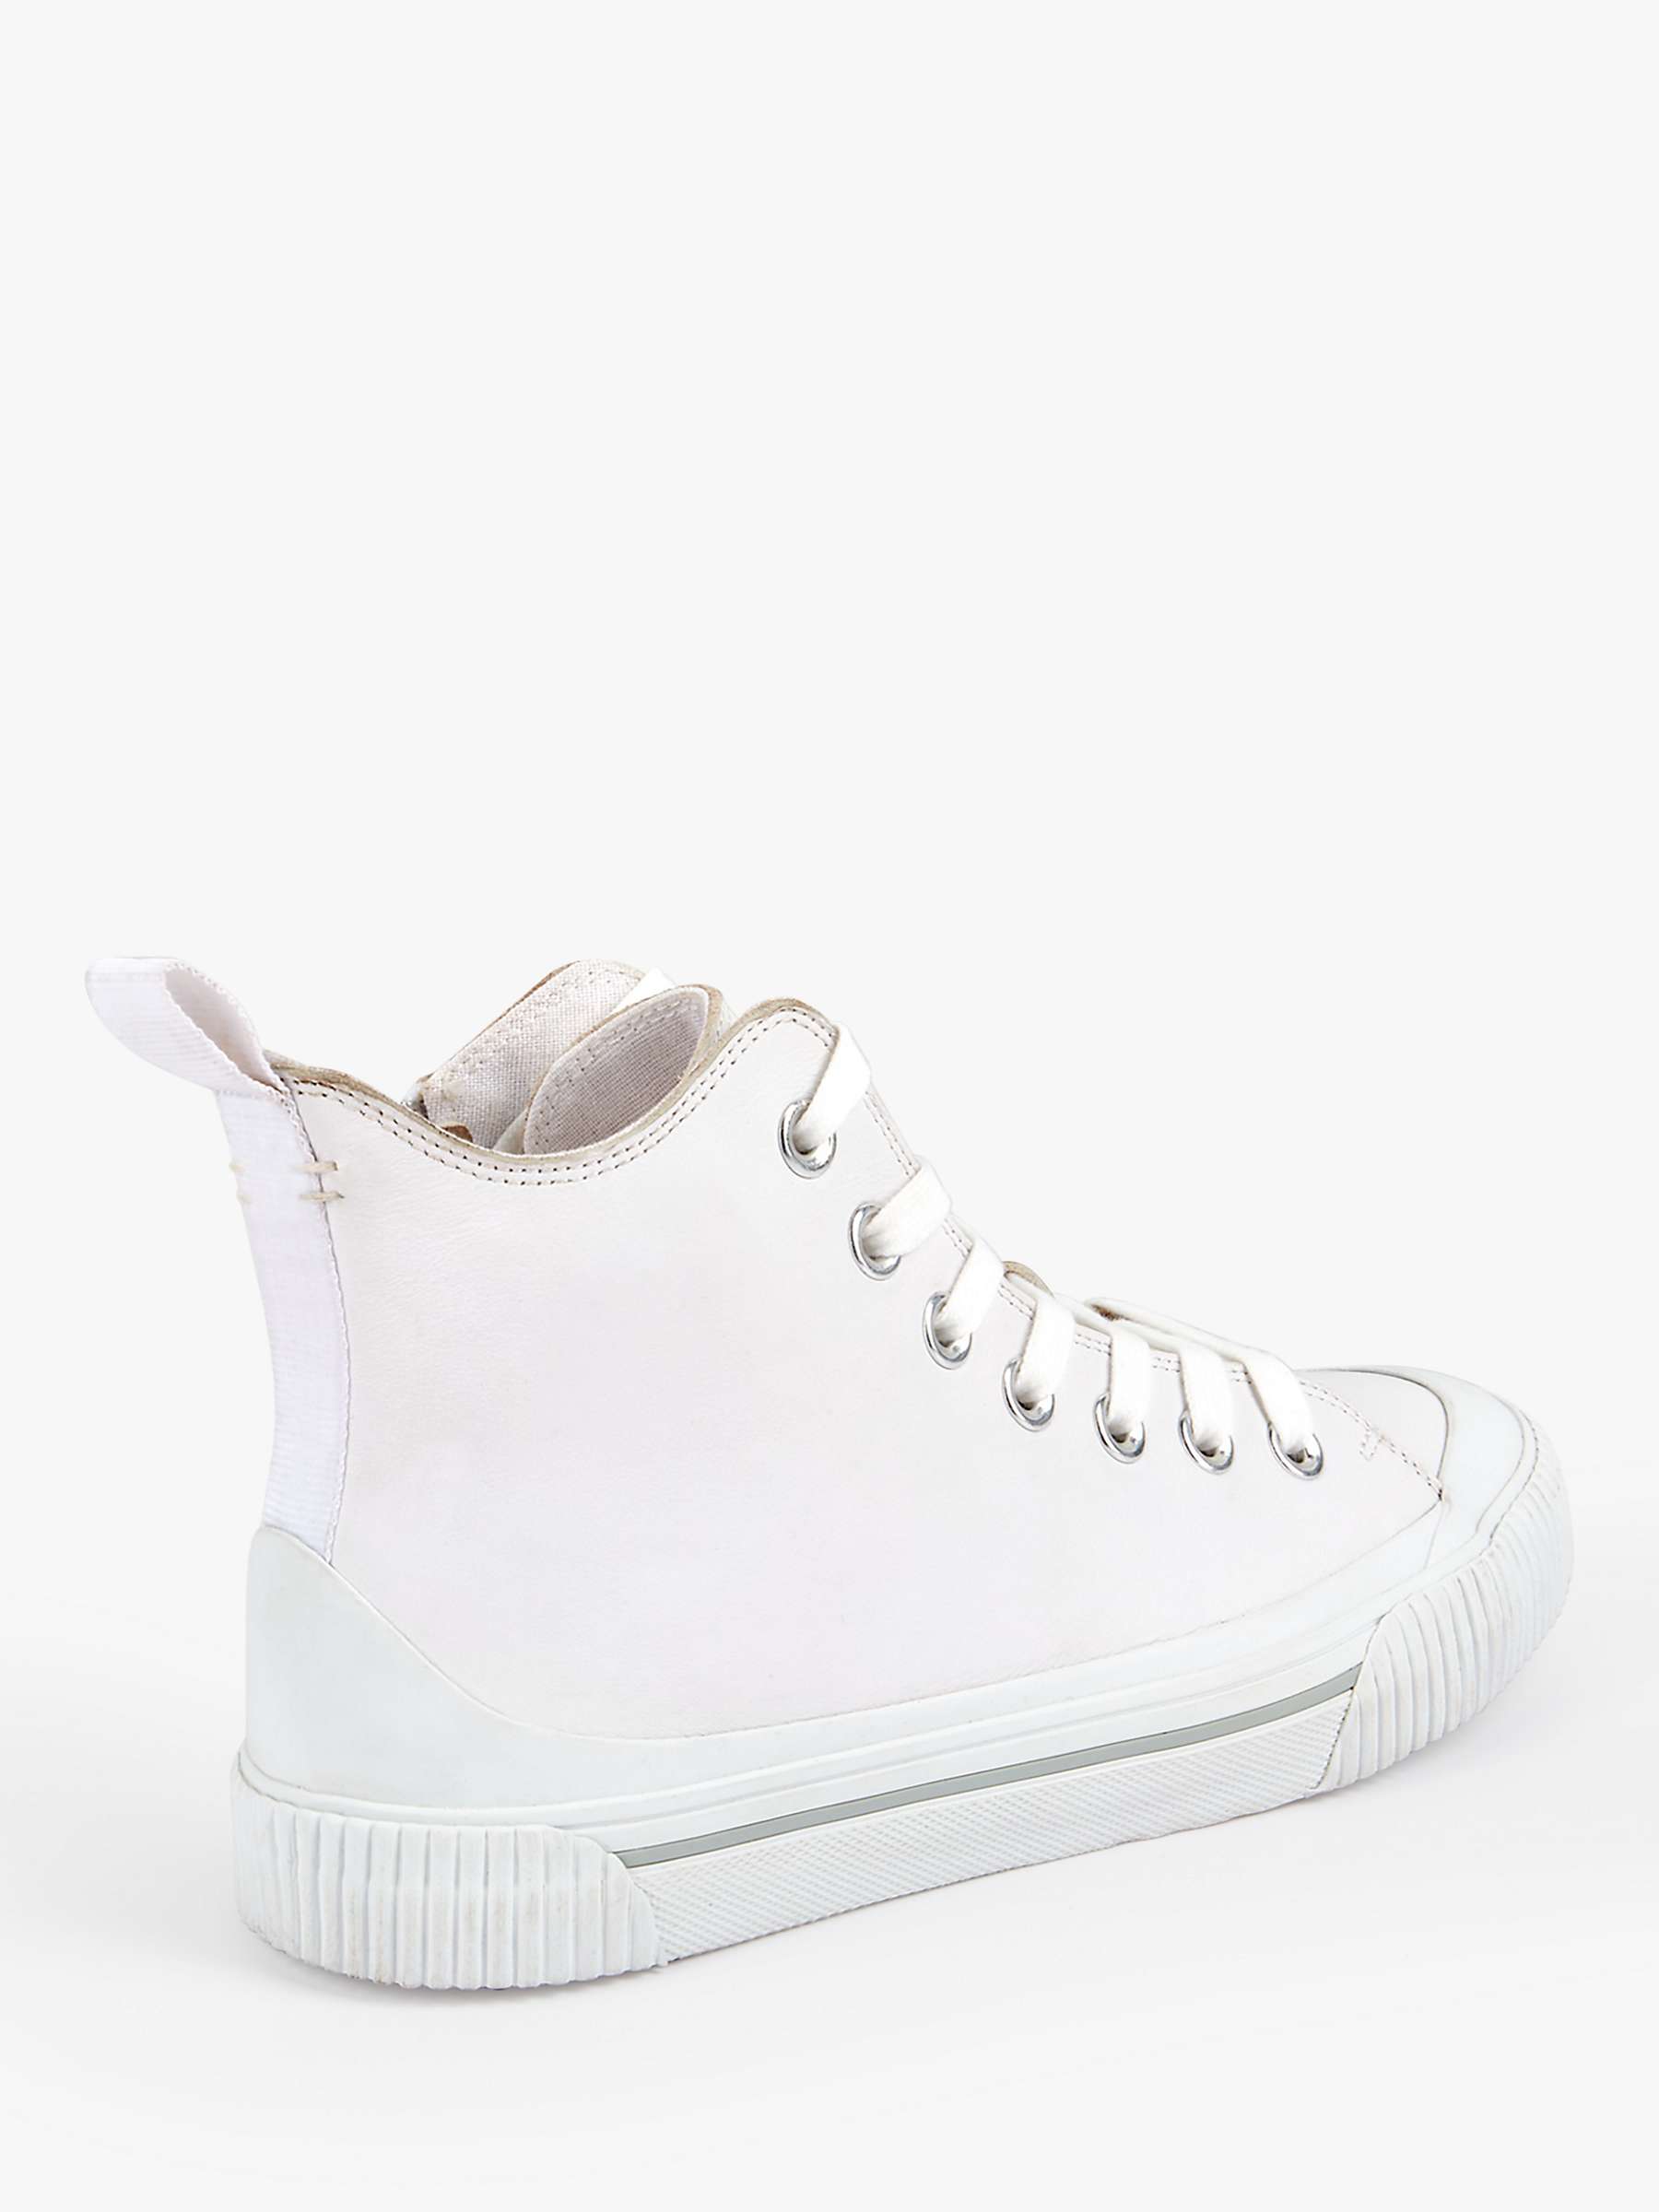 Buy hush Hadleigh High Top Trainers, White Online at johnlewis.com